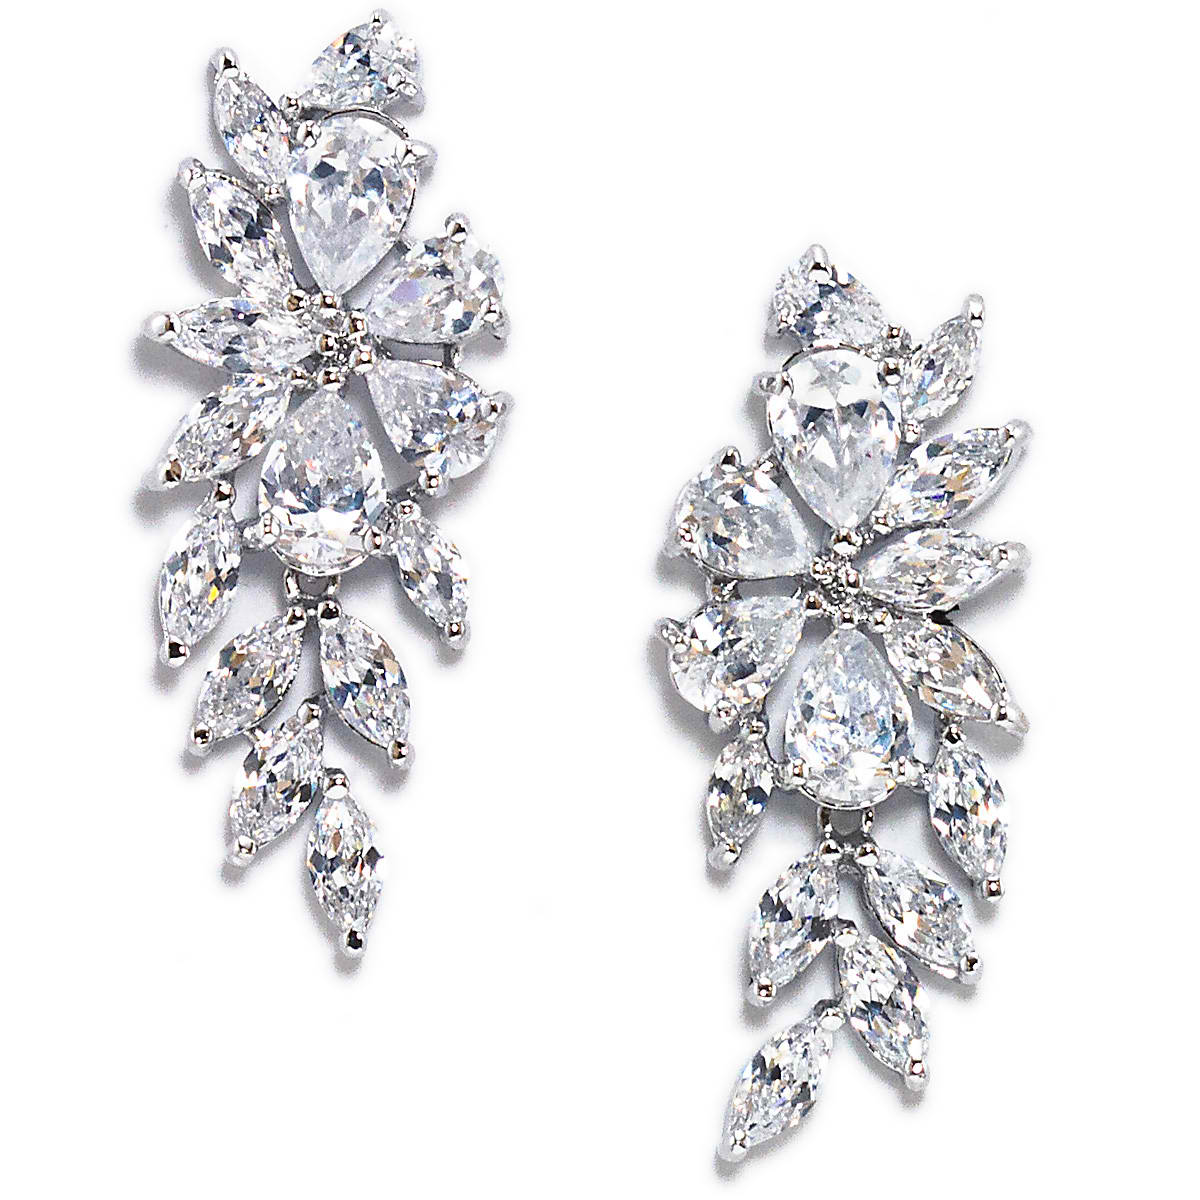 Share more than 264 cubic zirconia bridal earrings best